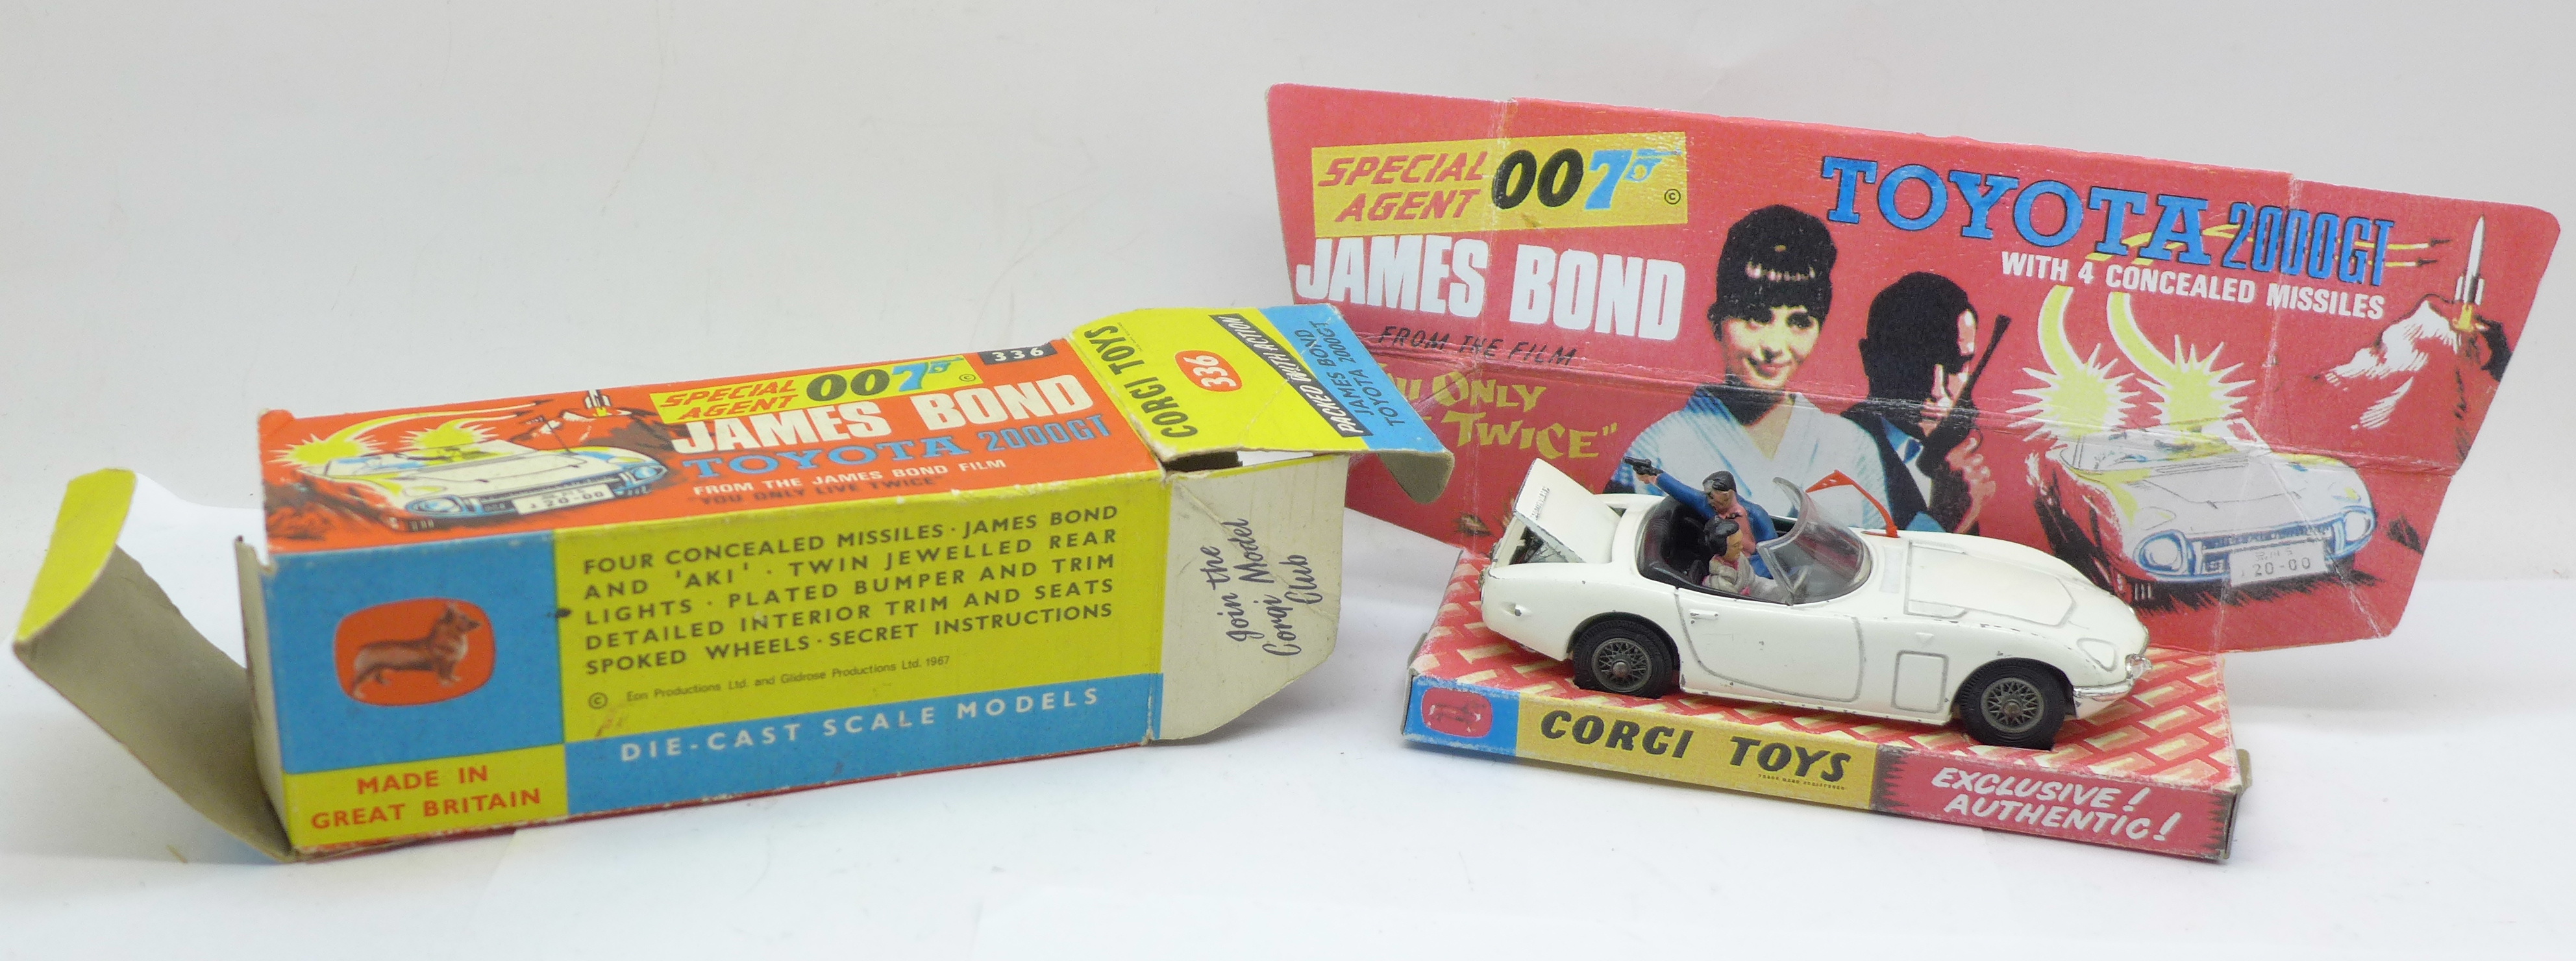 A Corgi Toys No. 366, James Bond Toyota 2000GT, boxed, with reproduction inner